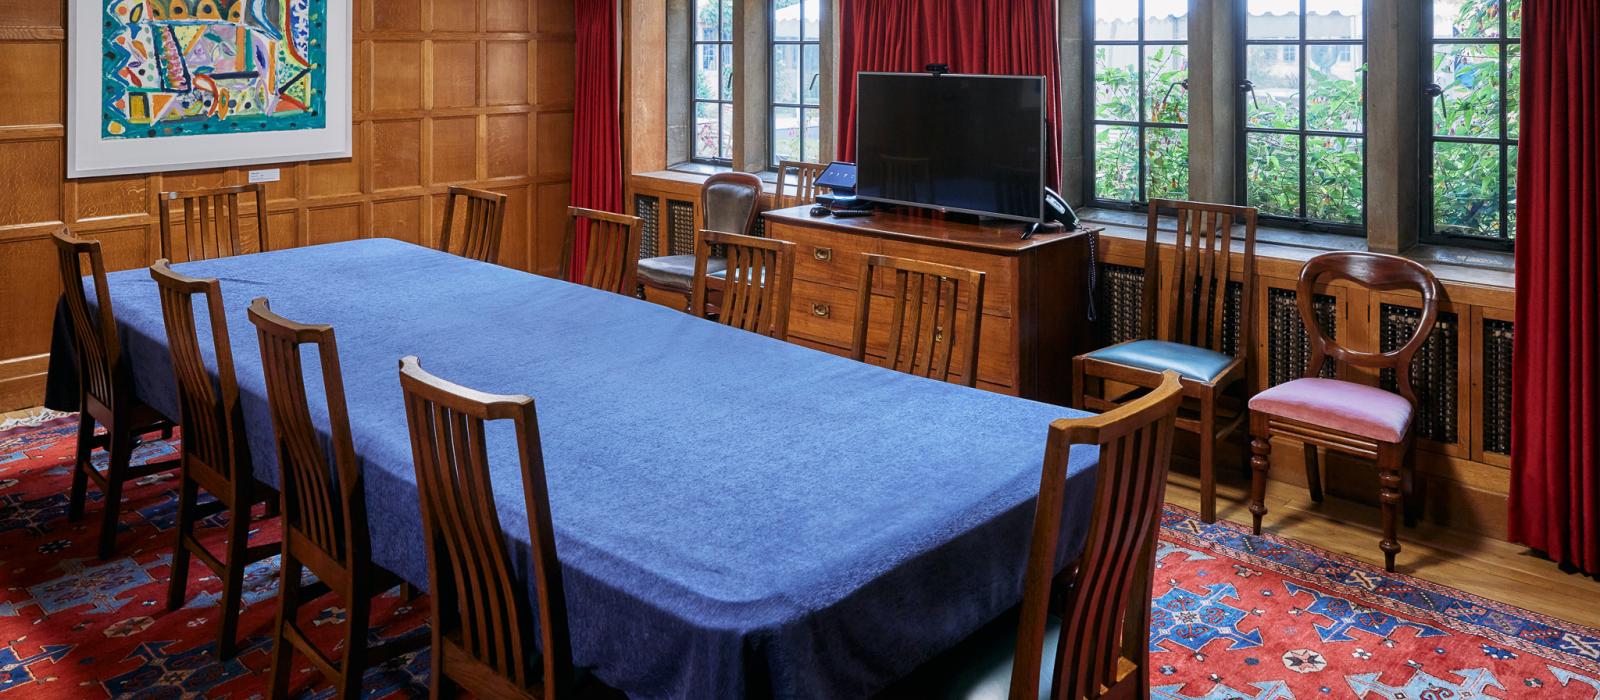 Brock Room, Nuffield College